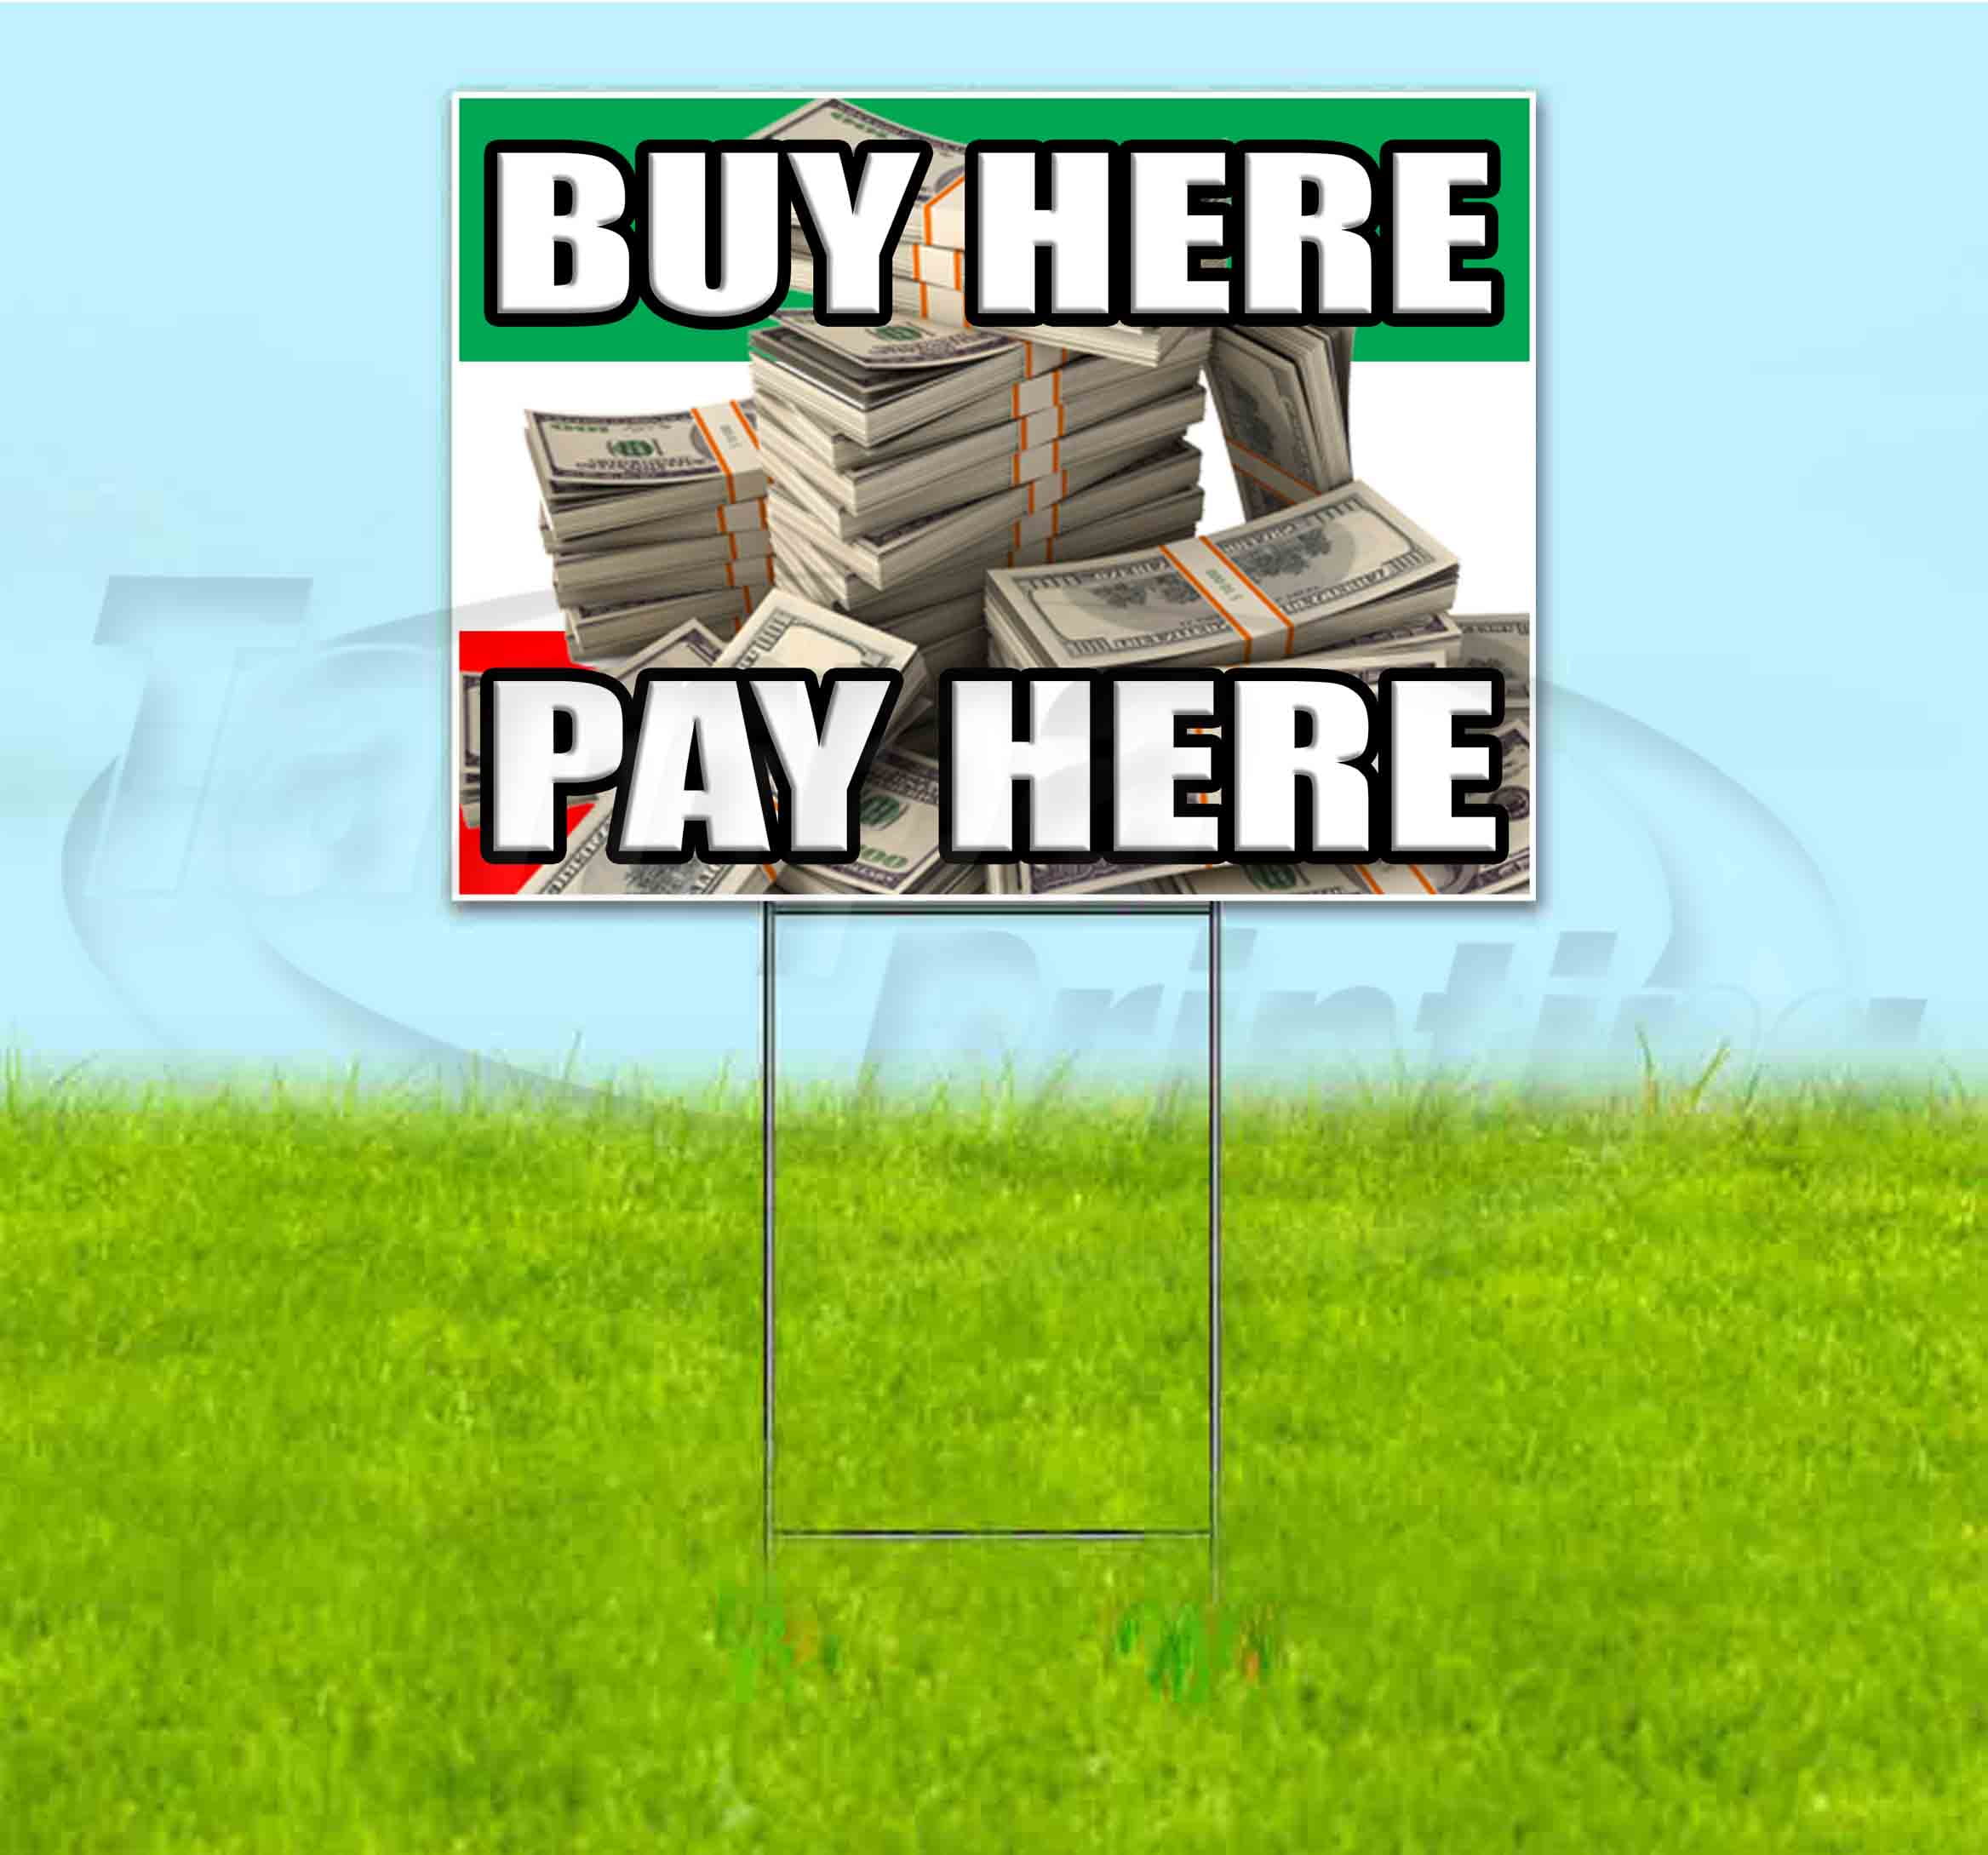 by here pay here